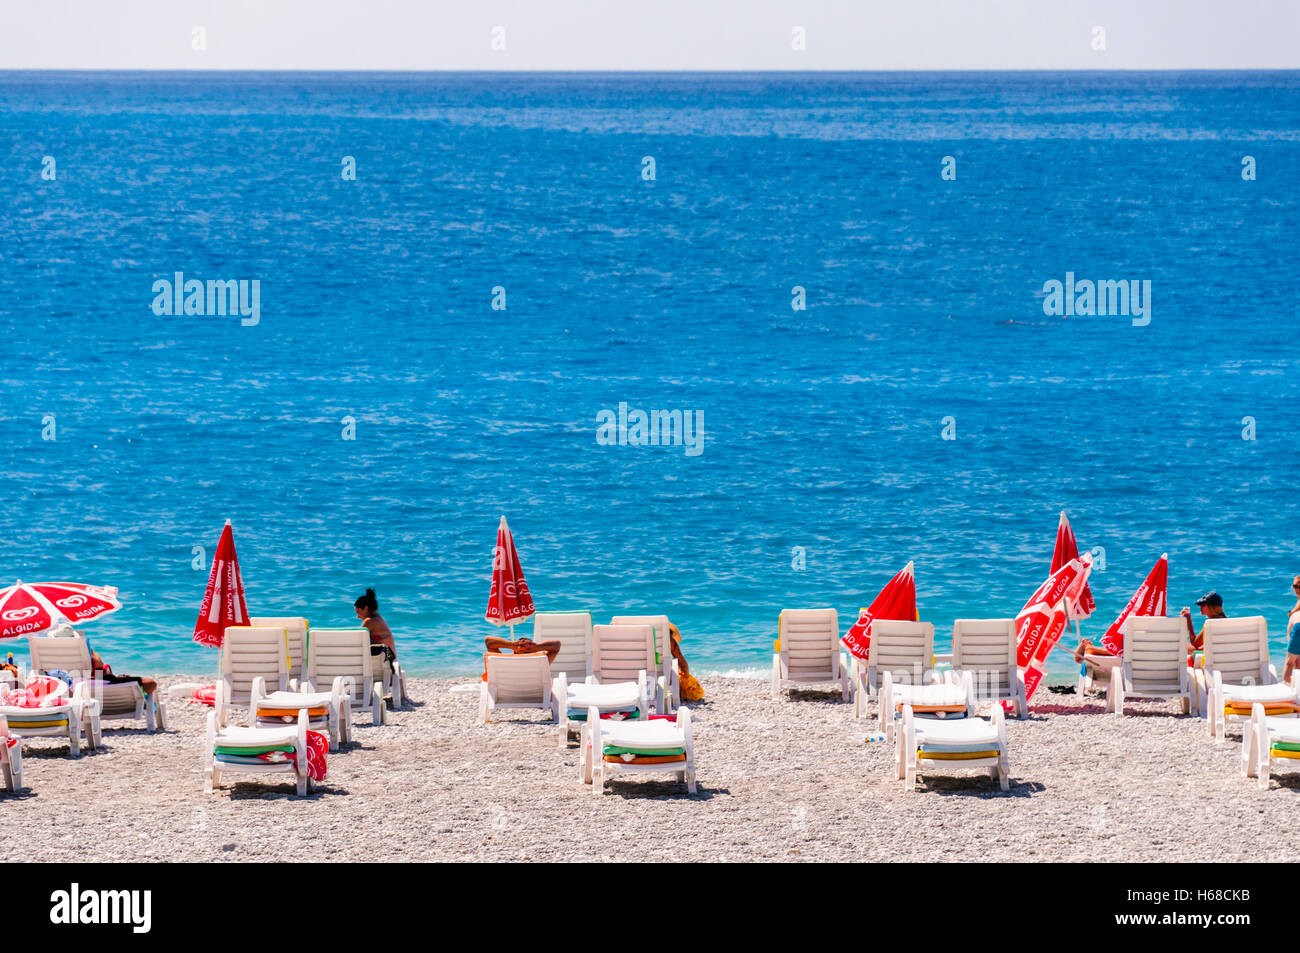 Sunloungers and umbrellas on a beach in front of a blue sea. Stock Photo